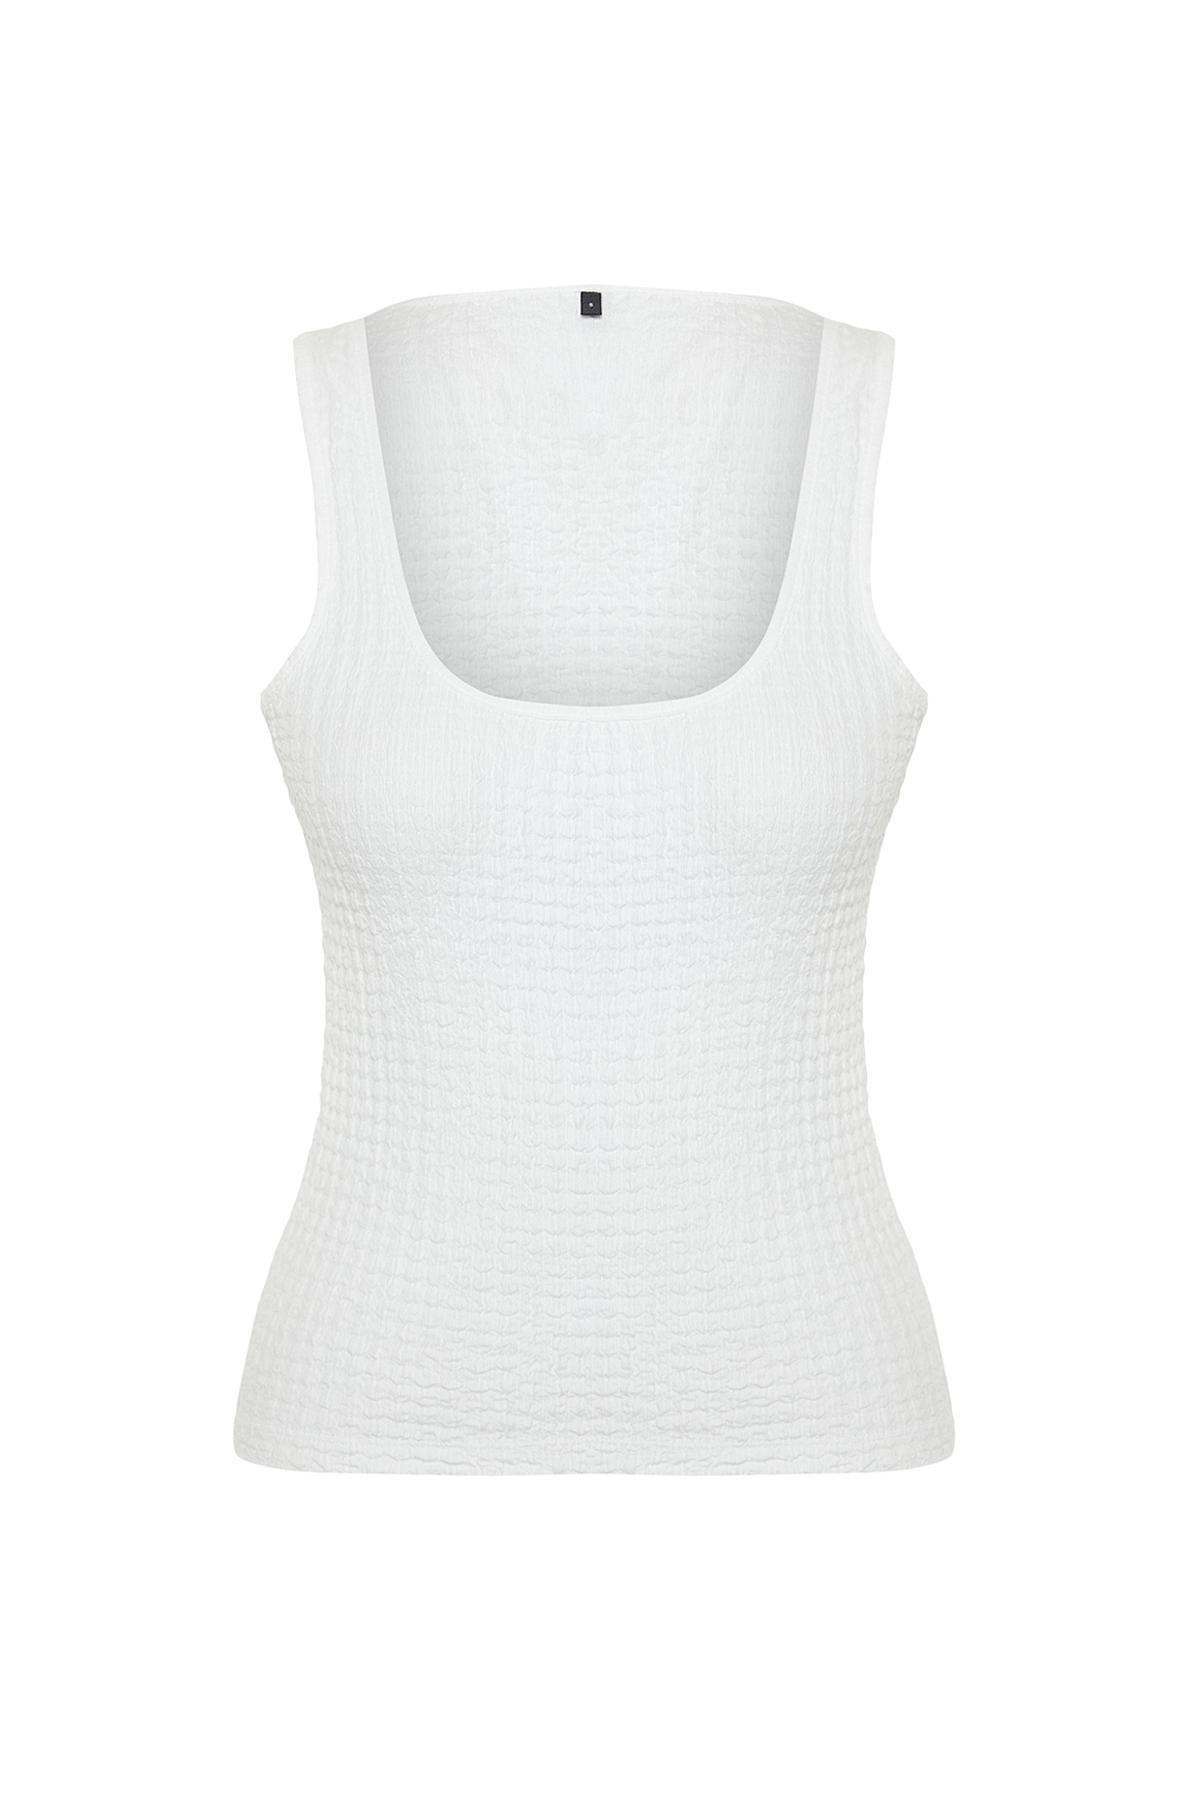 Trendyol - White Textured Fitted Pool Neck Knitted Undershirt